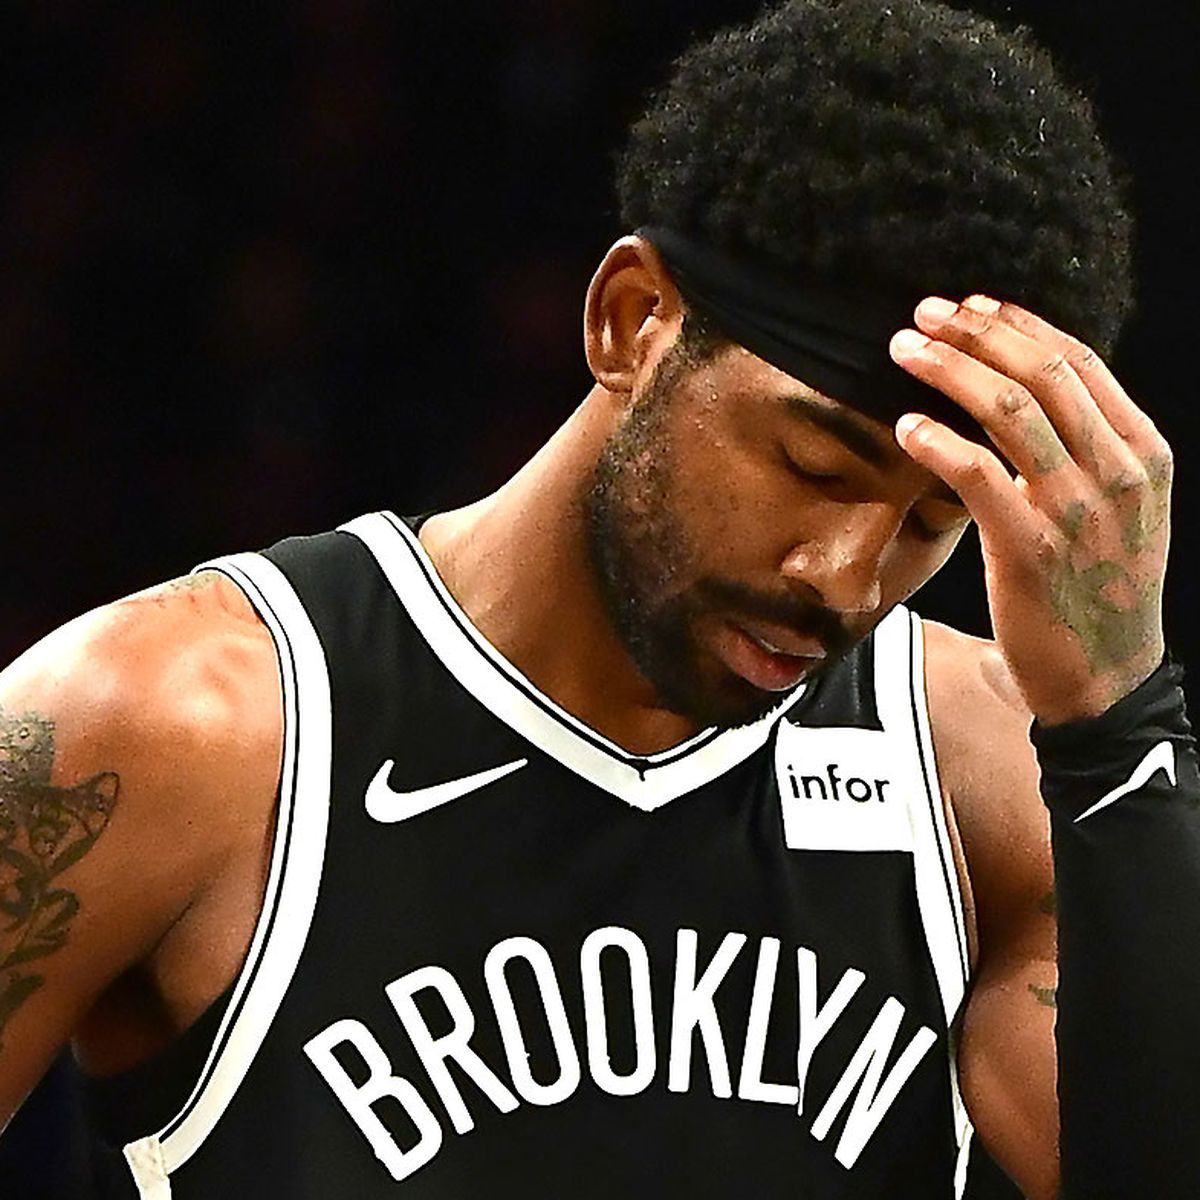 Nike splits with Brooklyn Nets' Kyrie Irving amid antisemitism fallout